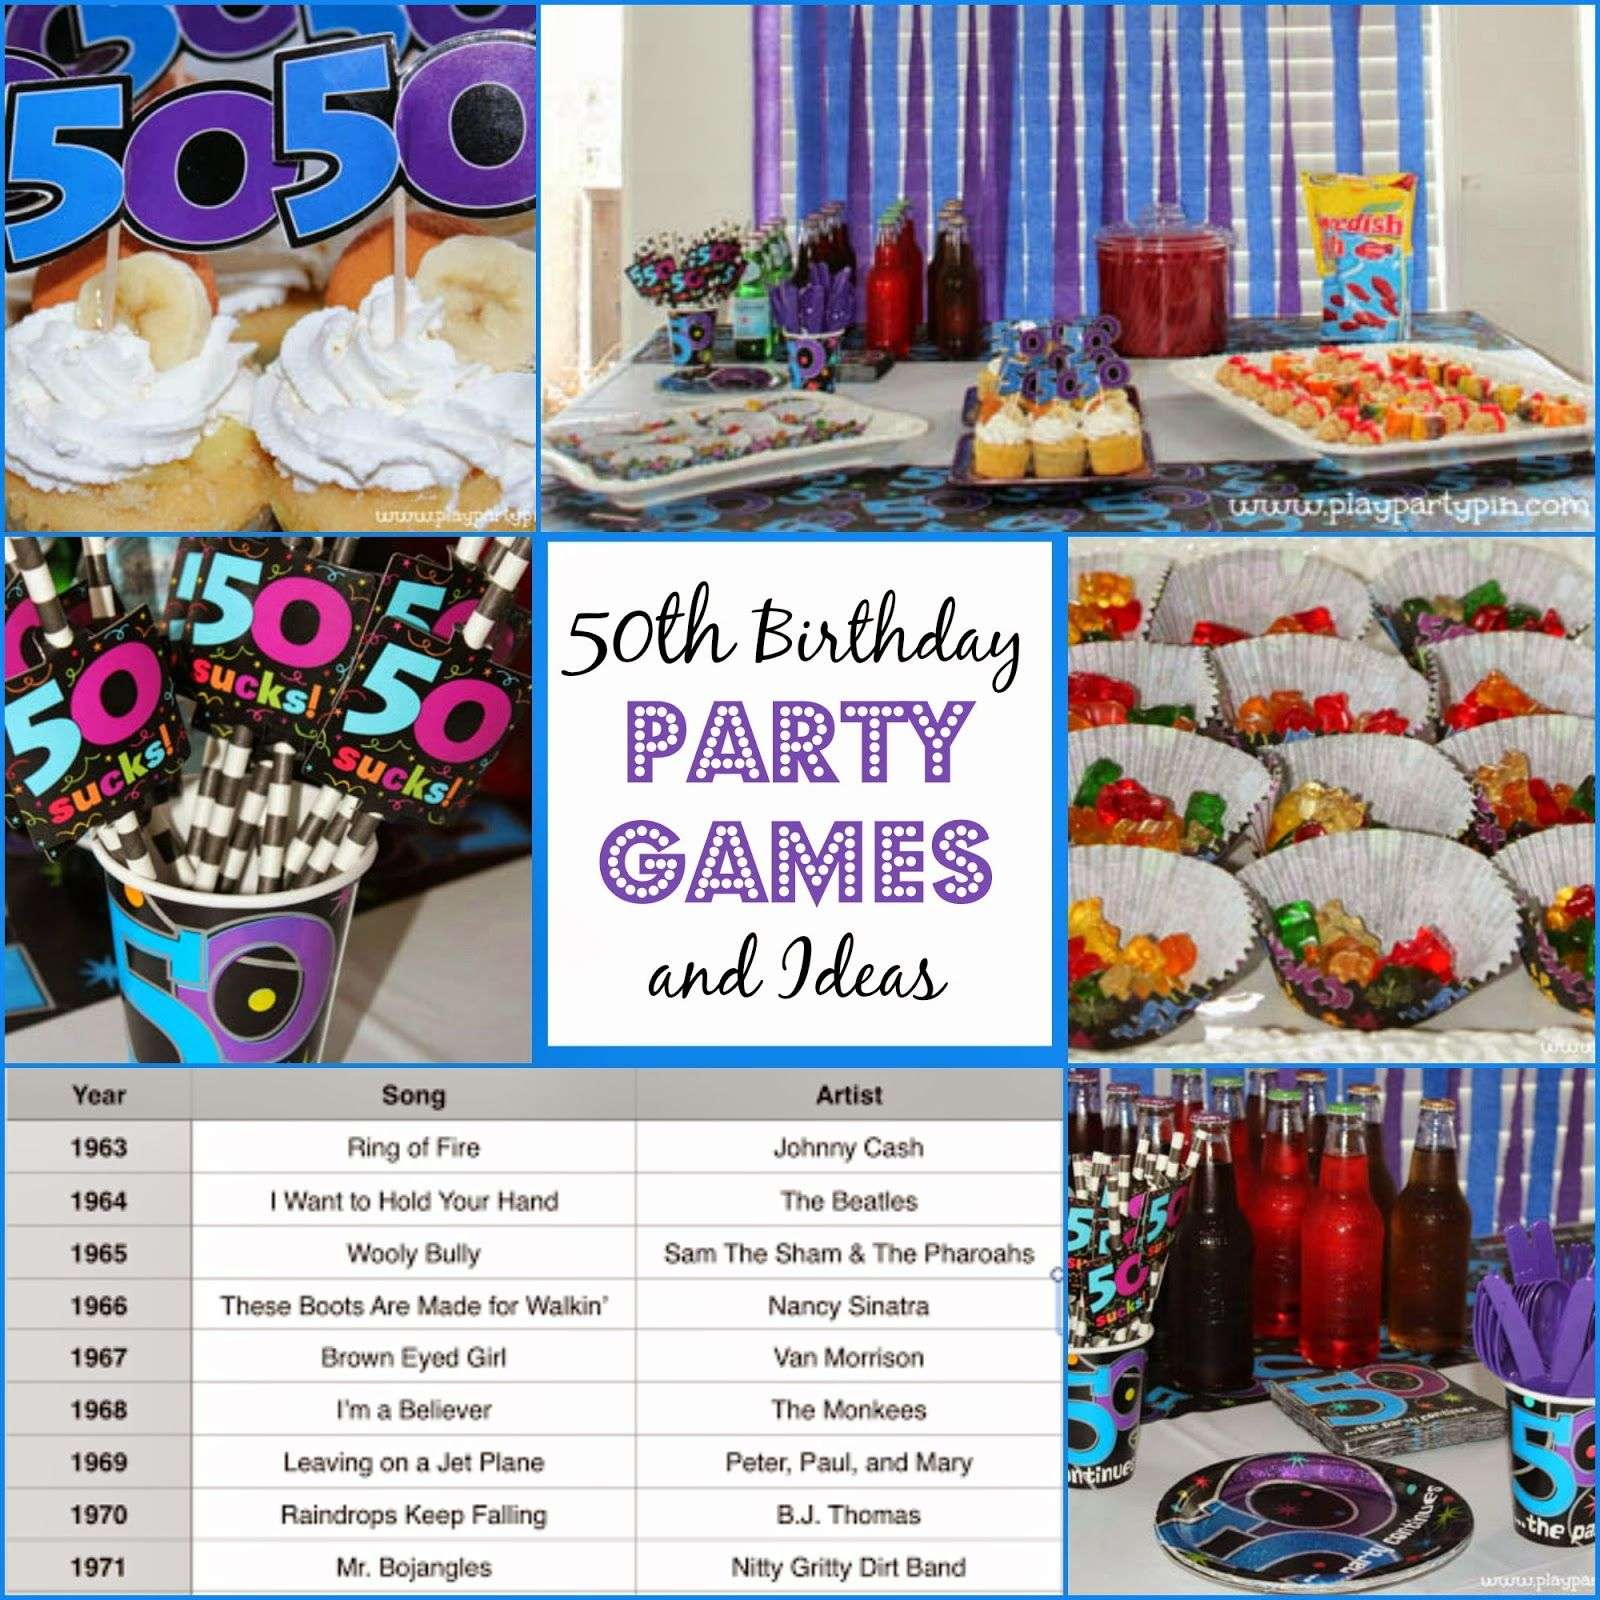 The Best 50th Birthday Party Ideas